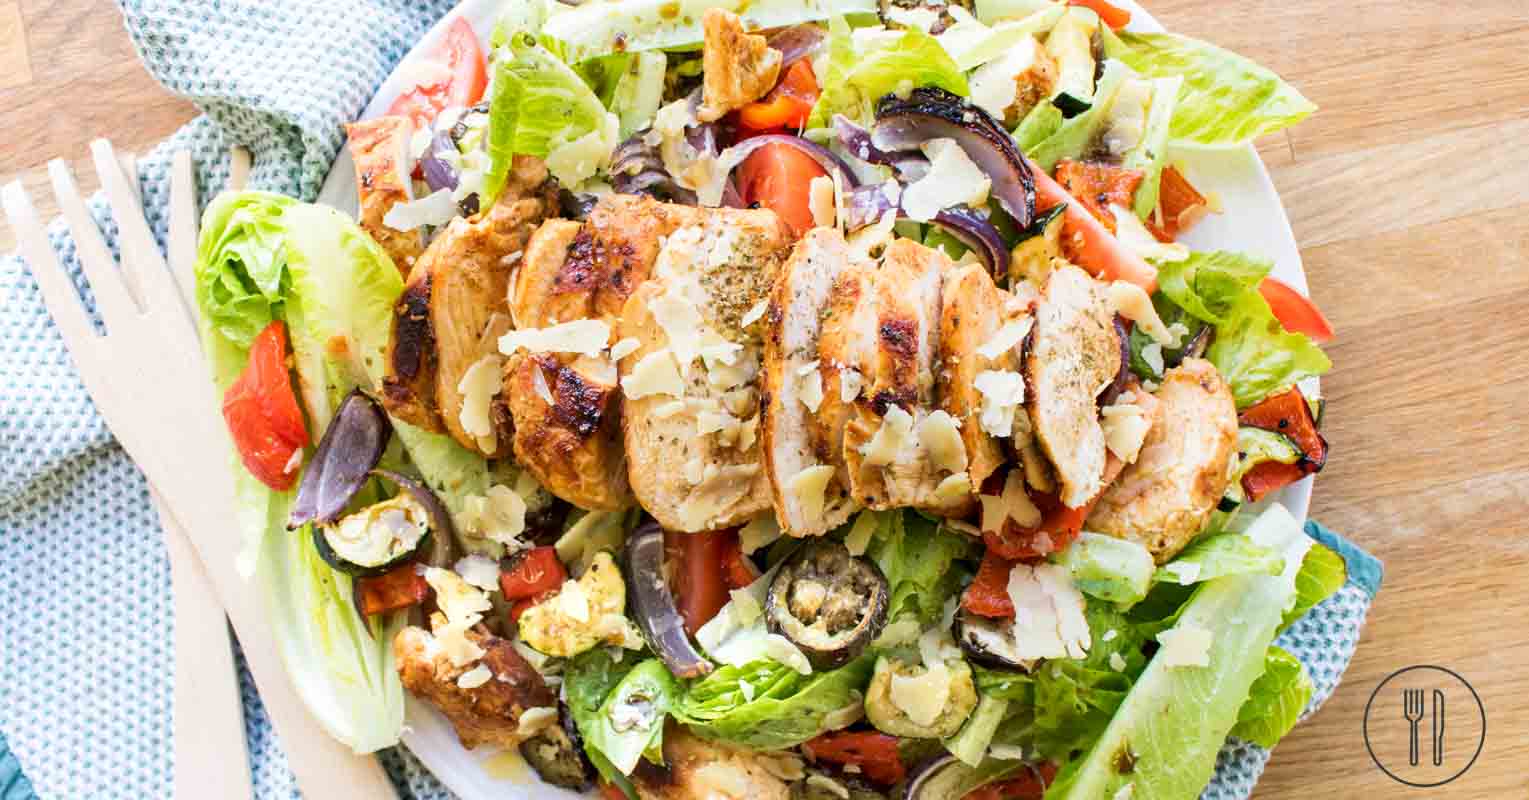 Paprika Chicken salad with roasted veggies & balsamic drizzle | Dinner ...